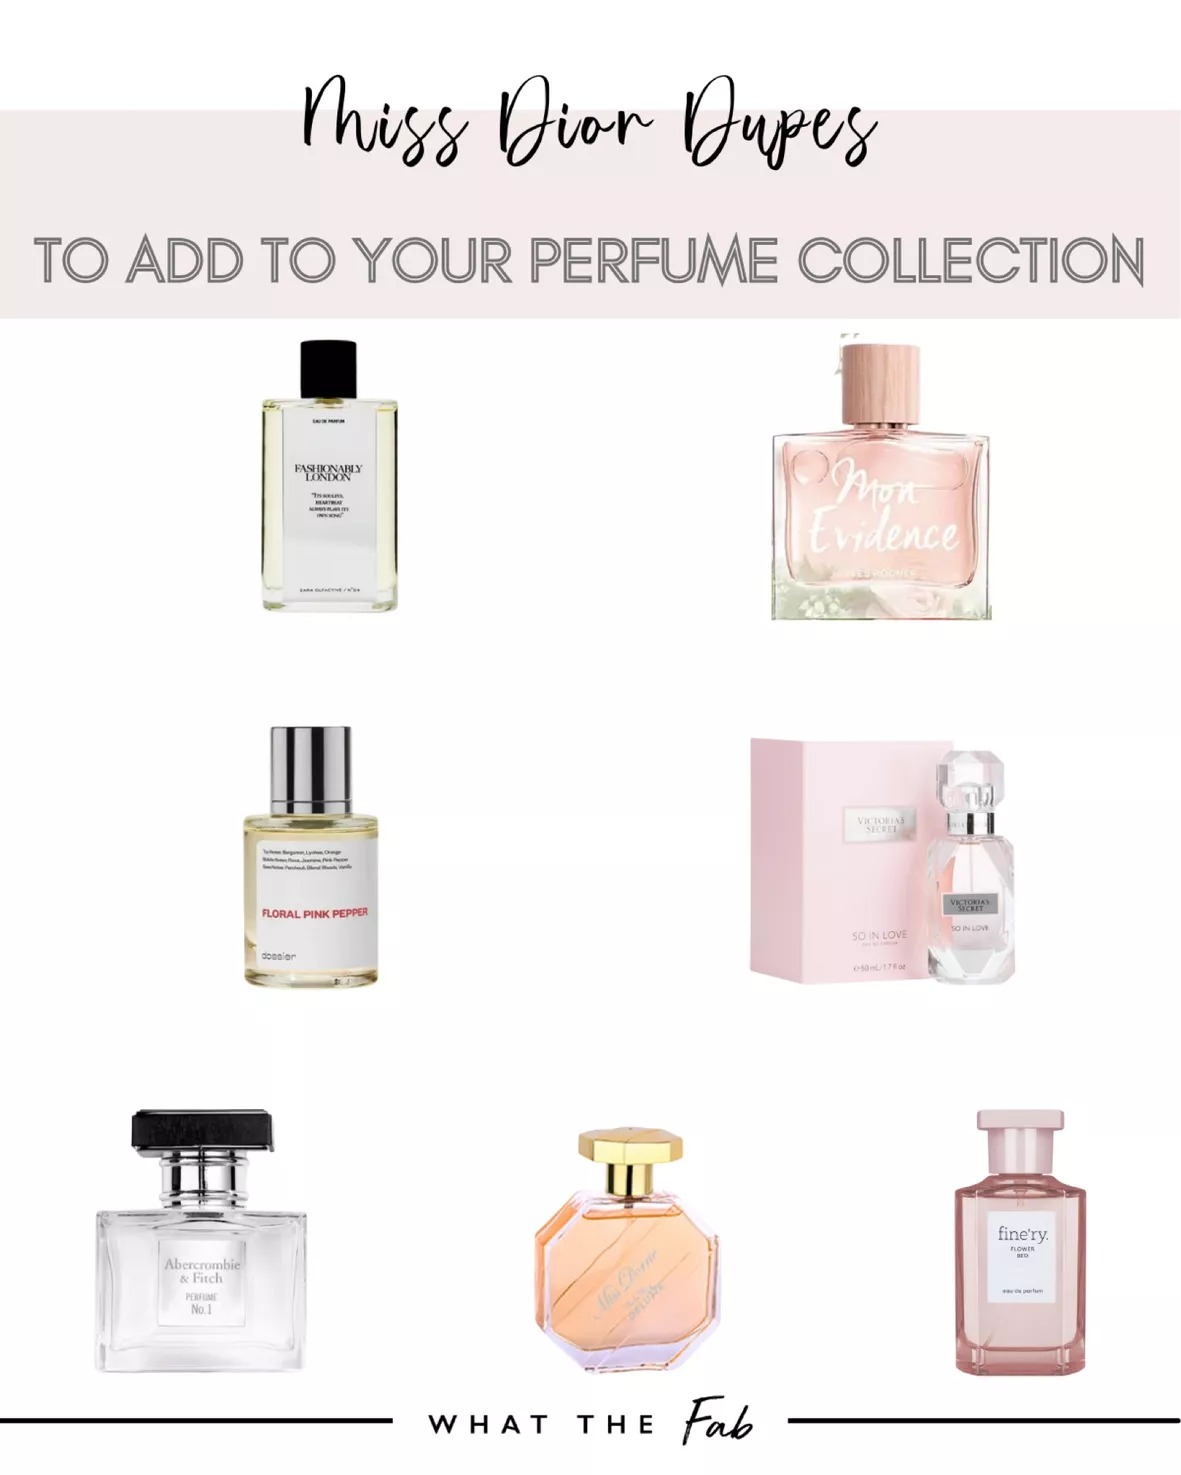 Fine'ry Flower Bed Fragrance … curated on LTK